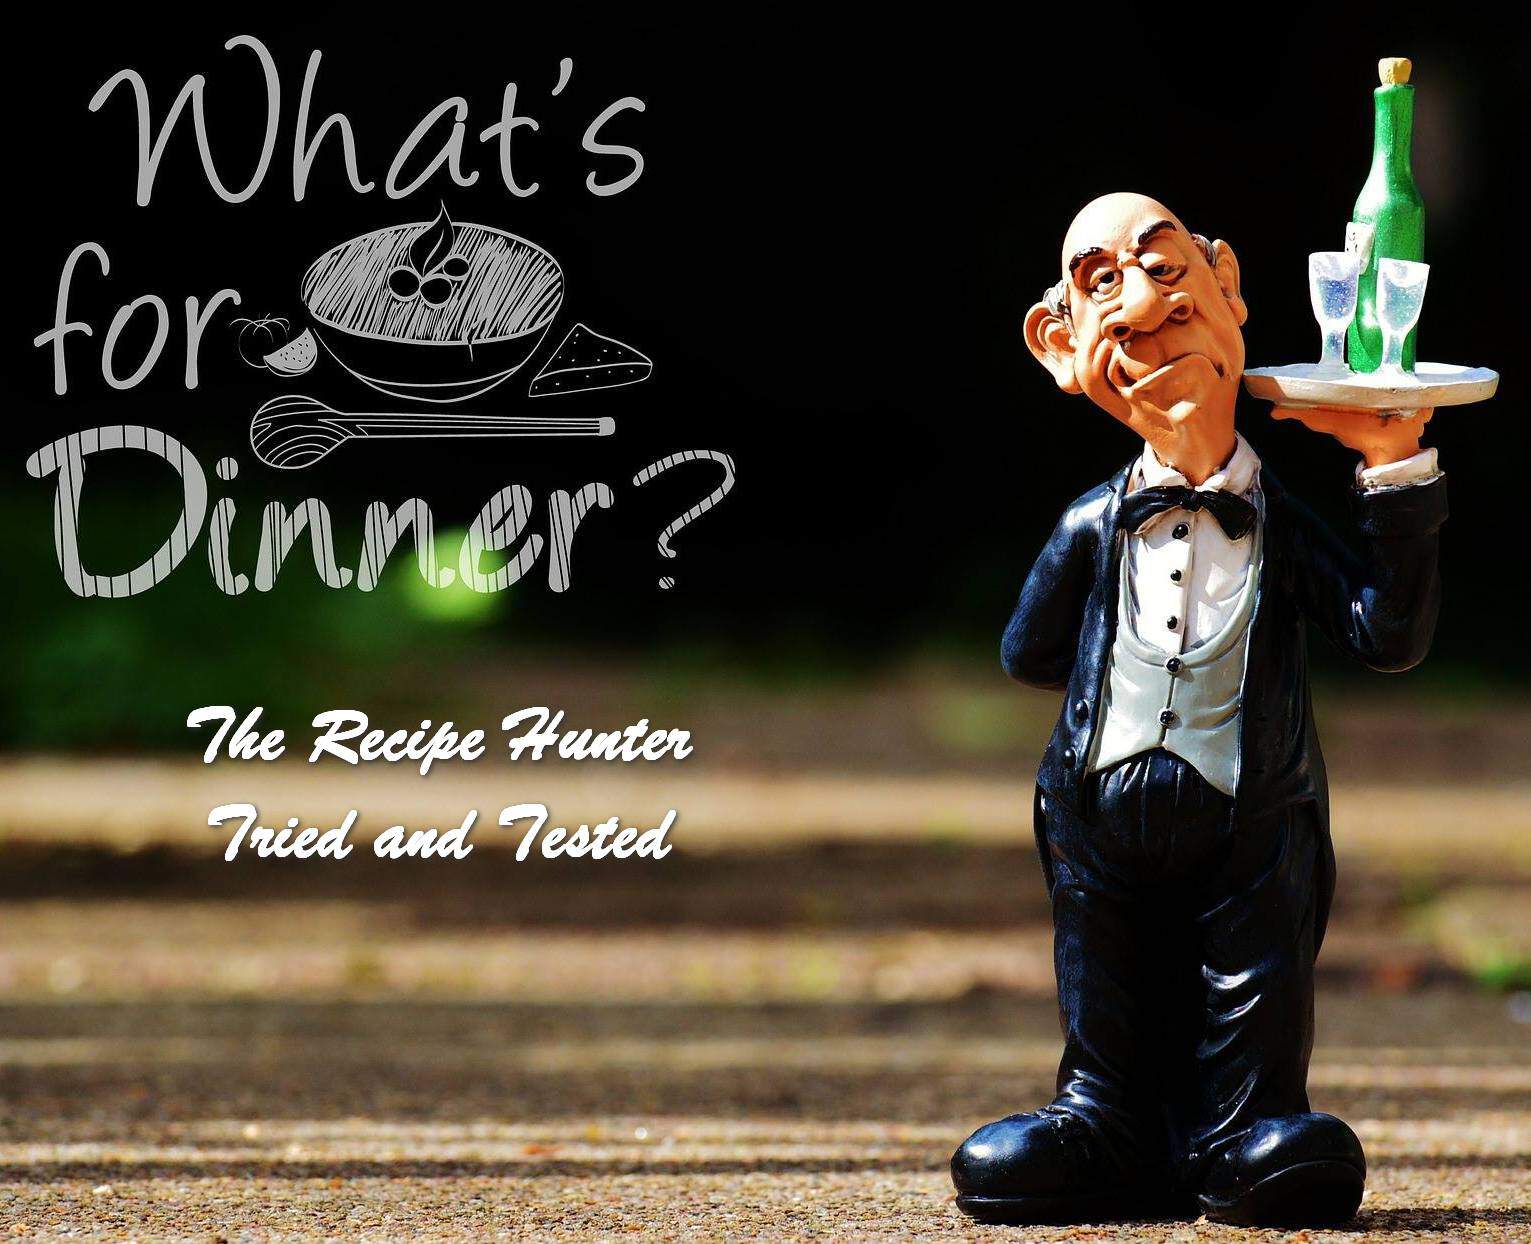 What's for dinner? An caricature or a waiter dressed in black suit with white shirt